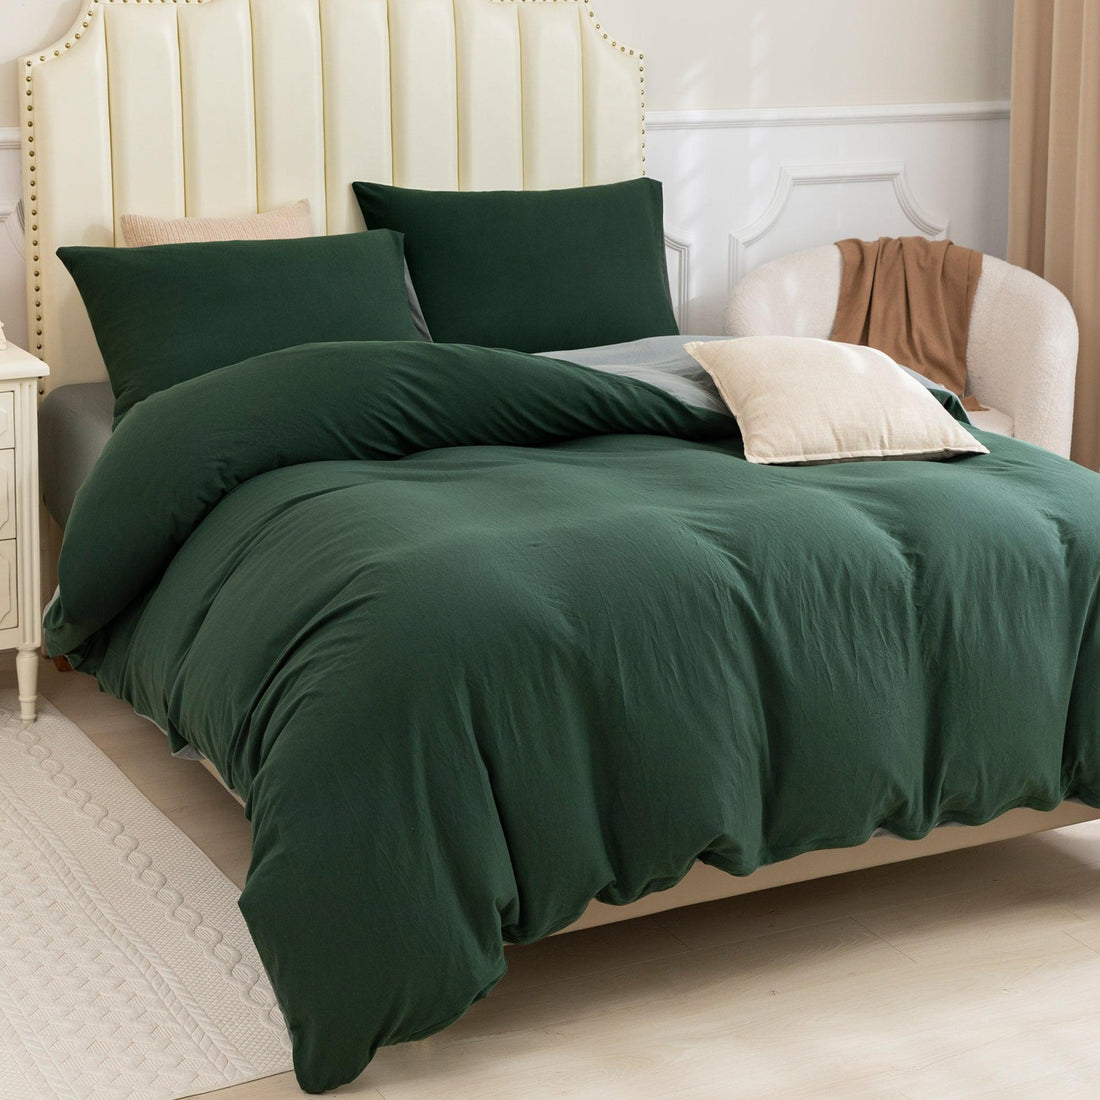 Pure Era - Jersey Duvet Cover Set - Reversible Solid Forest Green/Dark Gray